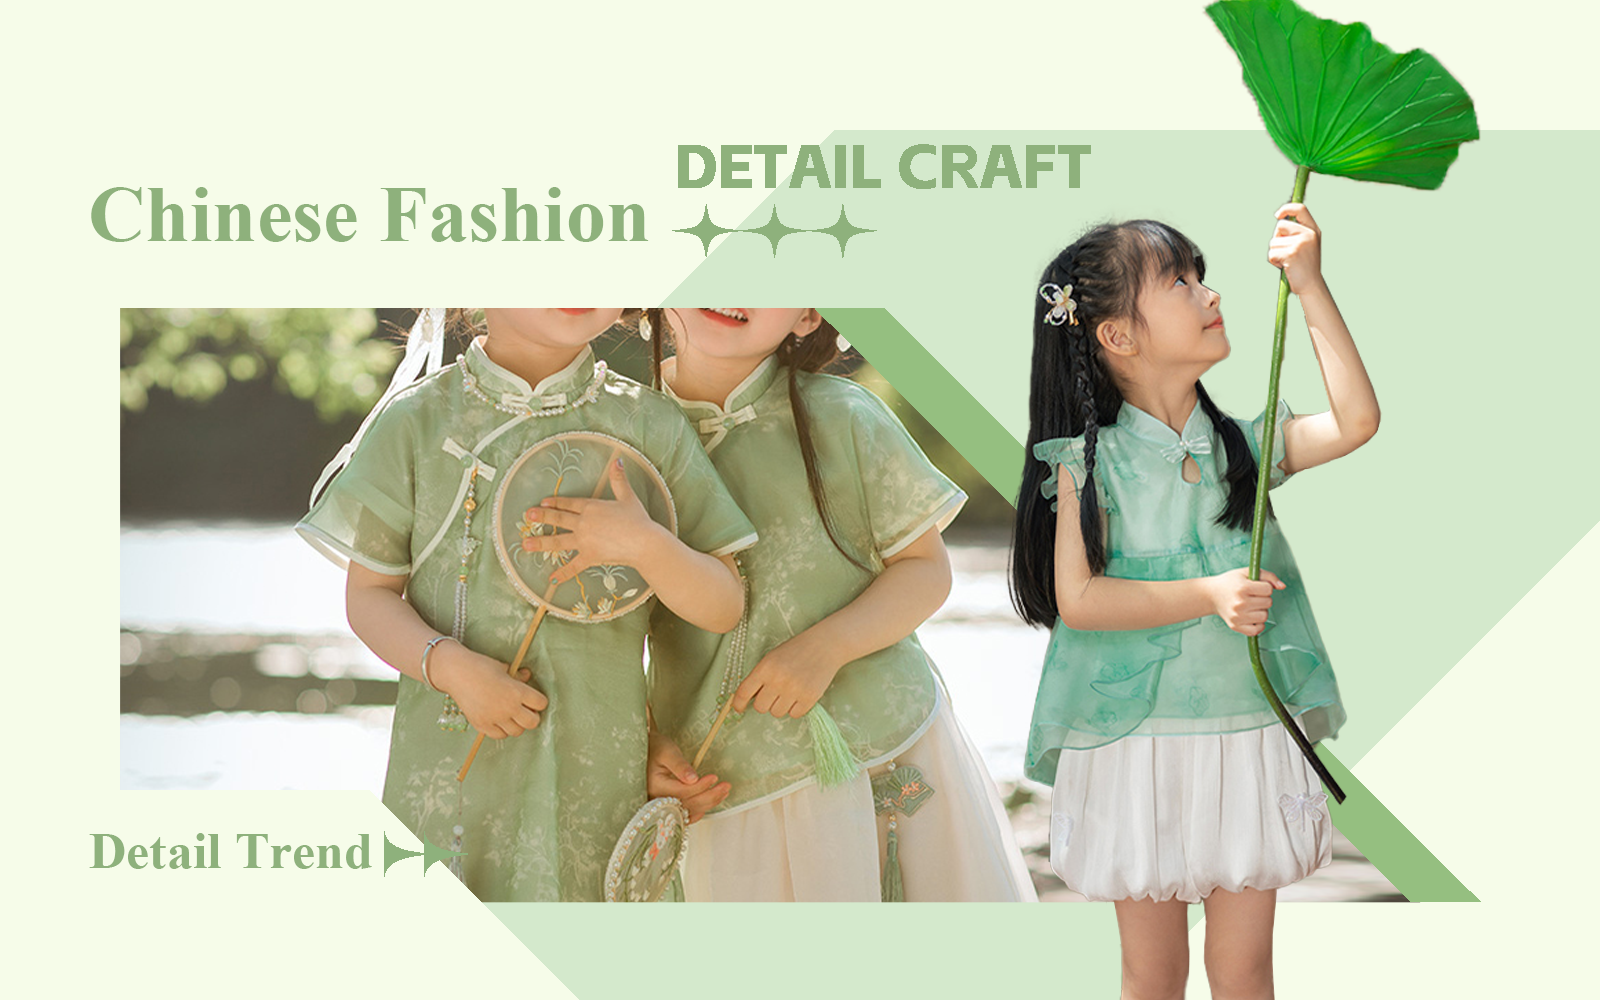 Chinese Fashion -- The Detail & Craft Trend for Kidswear